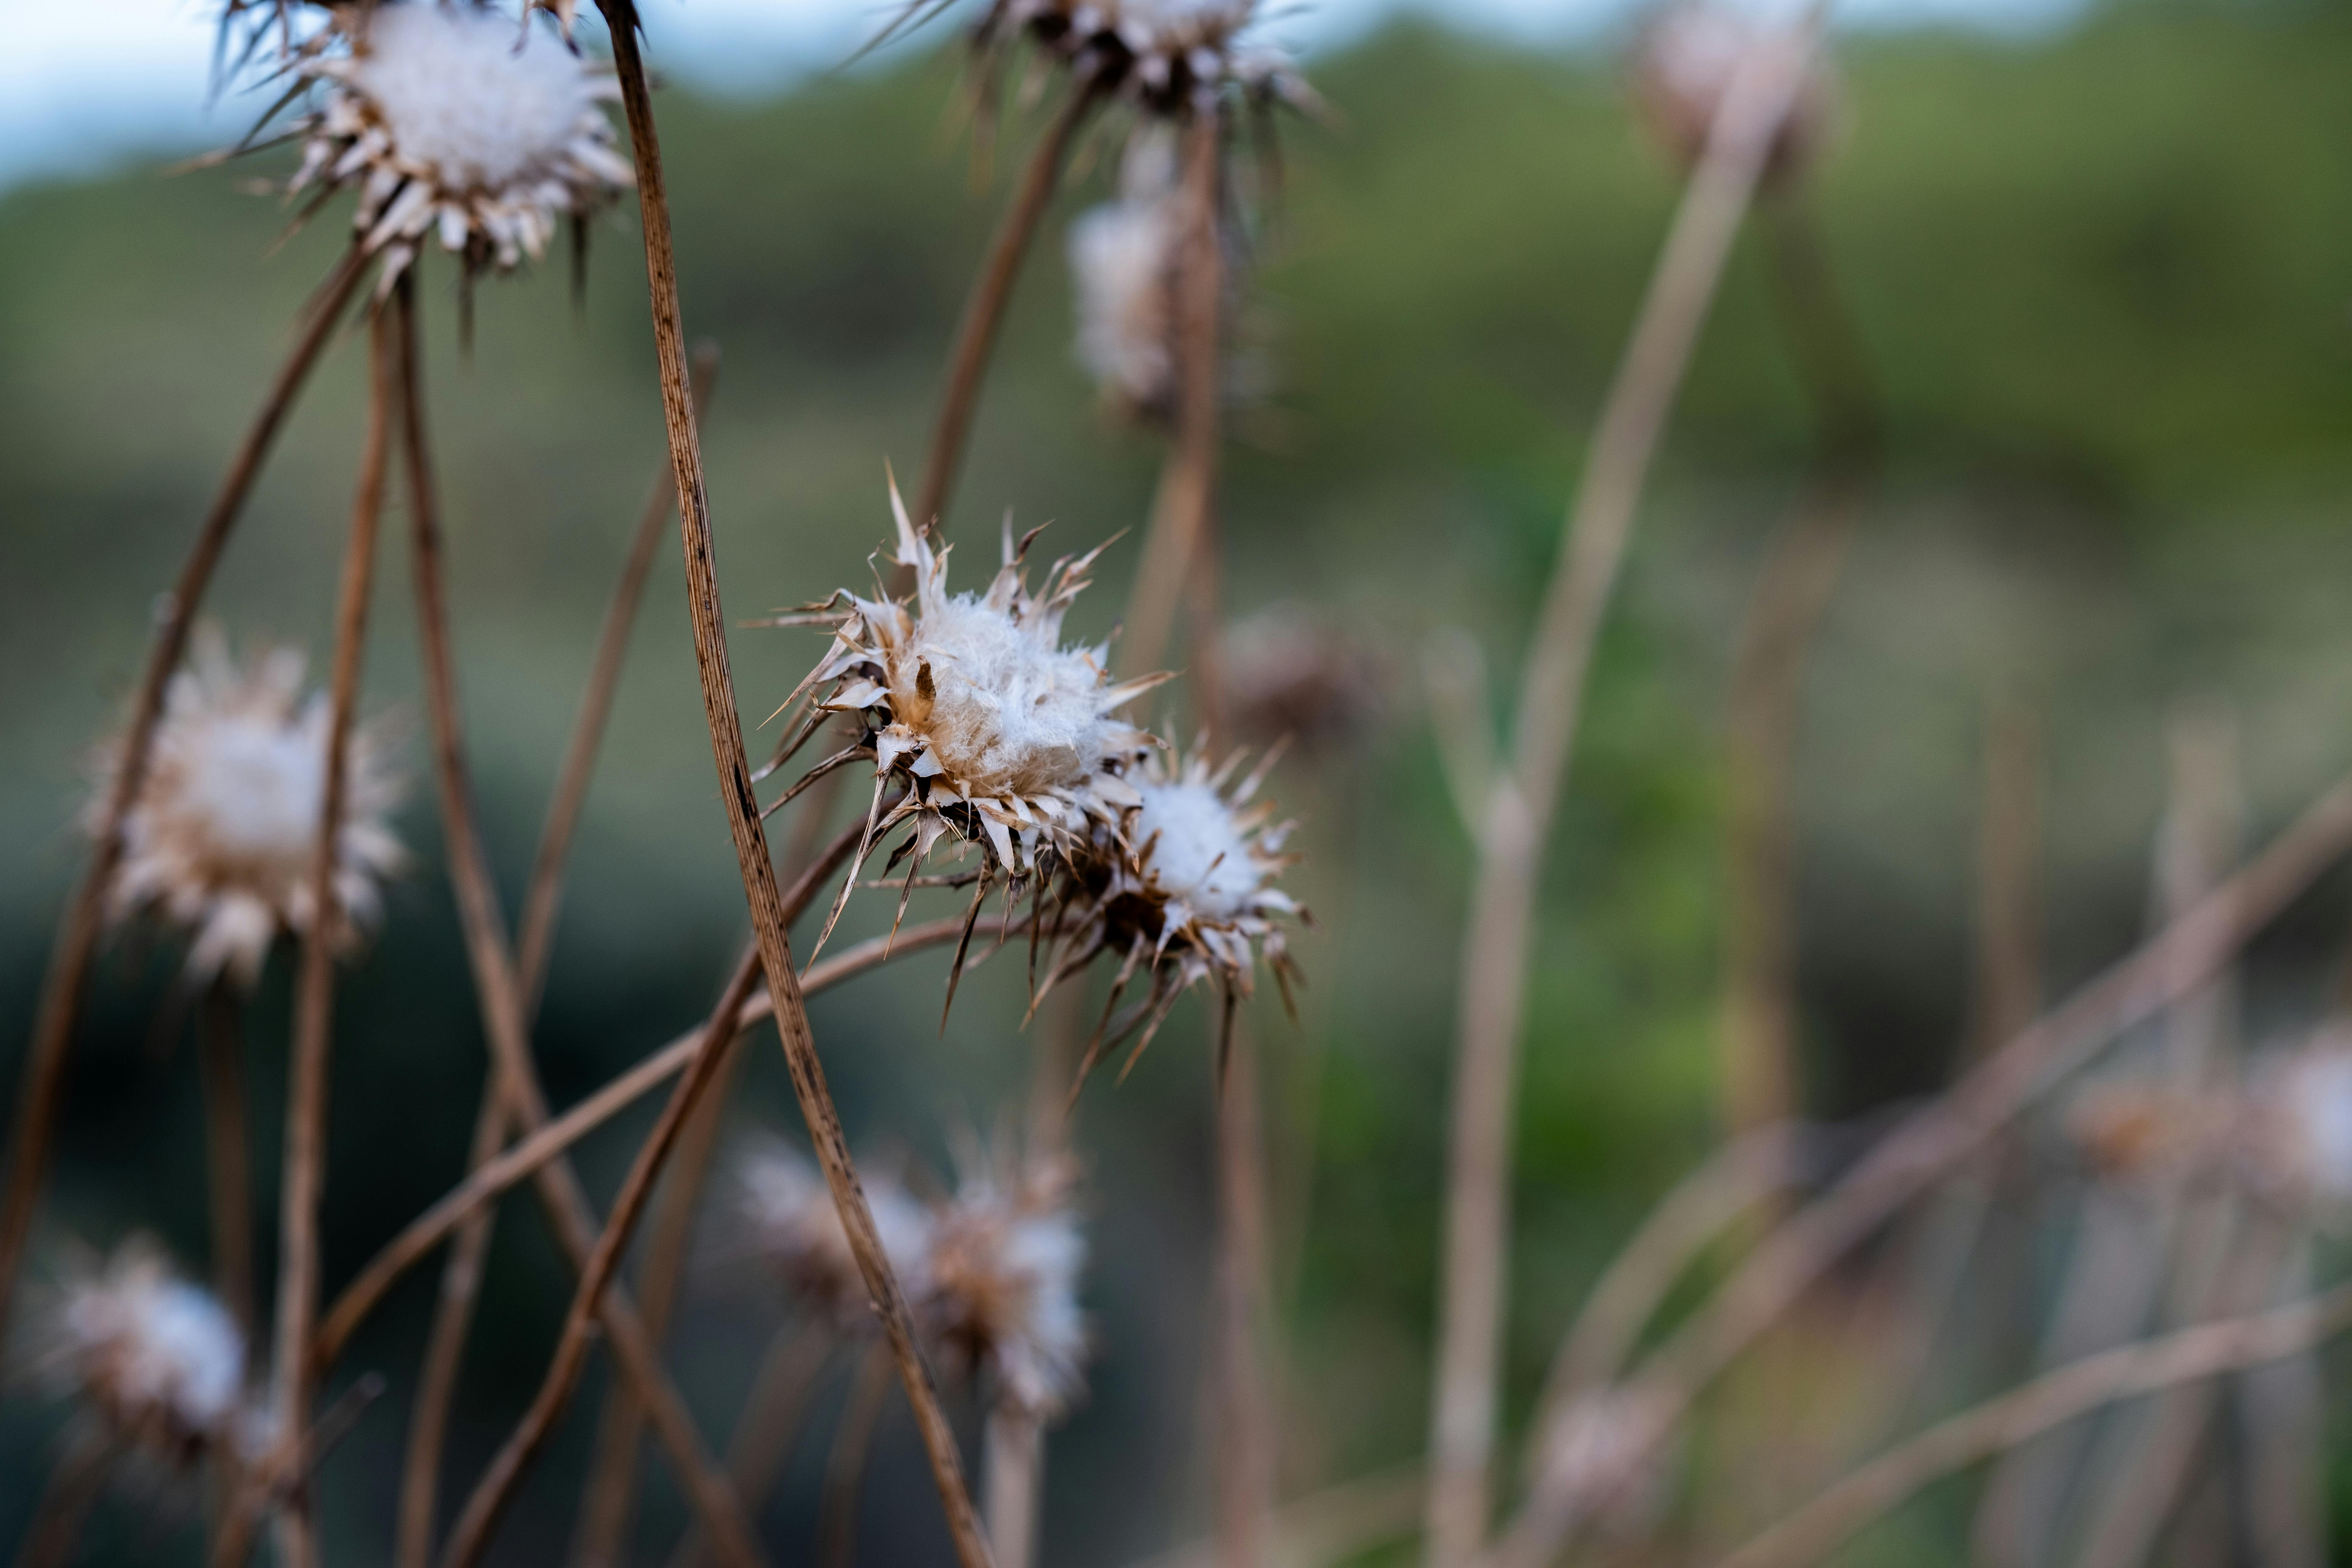 A close up of some dried plants with some white flowers · Free Stock